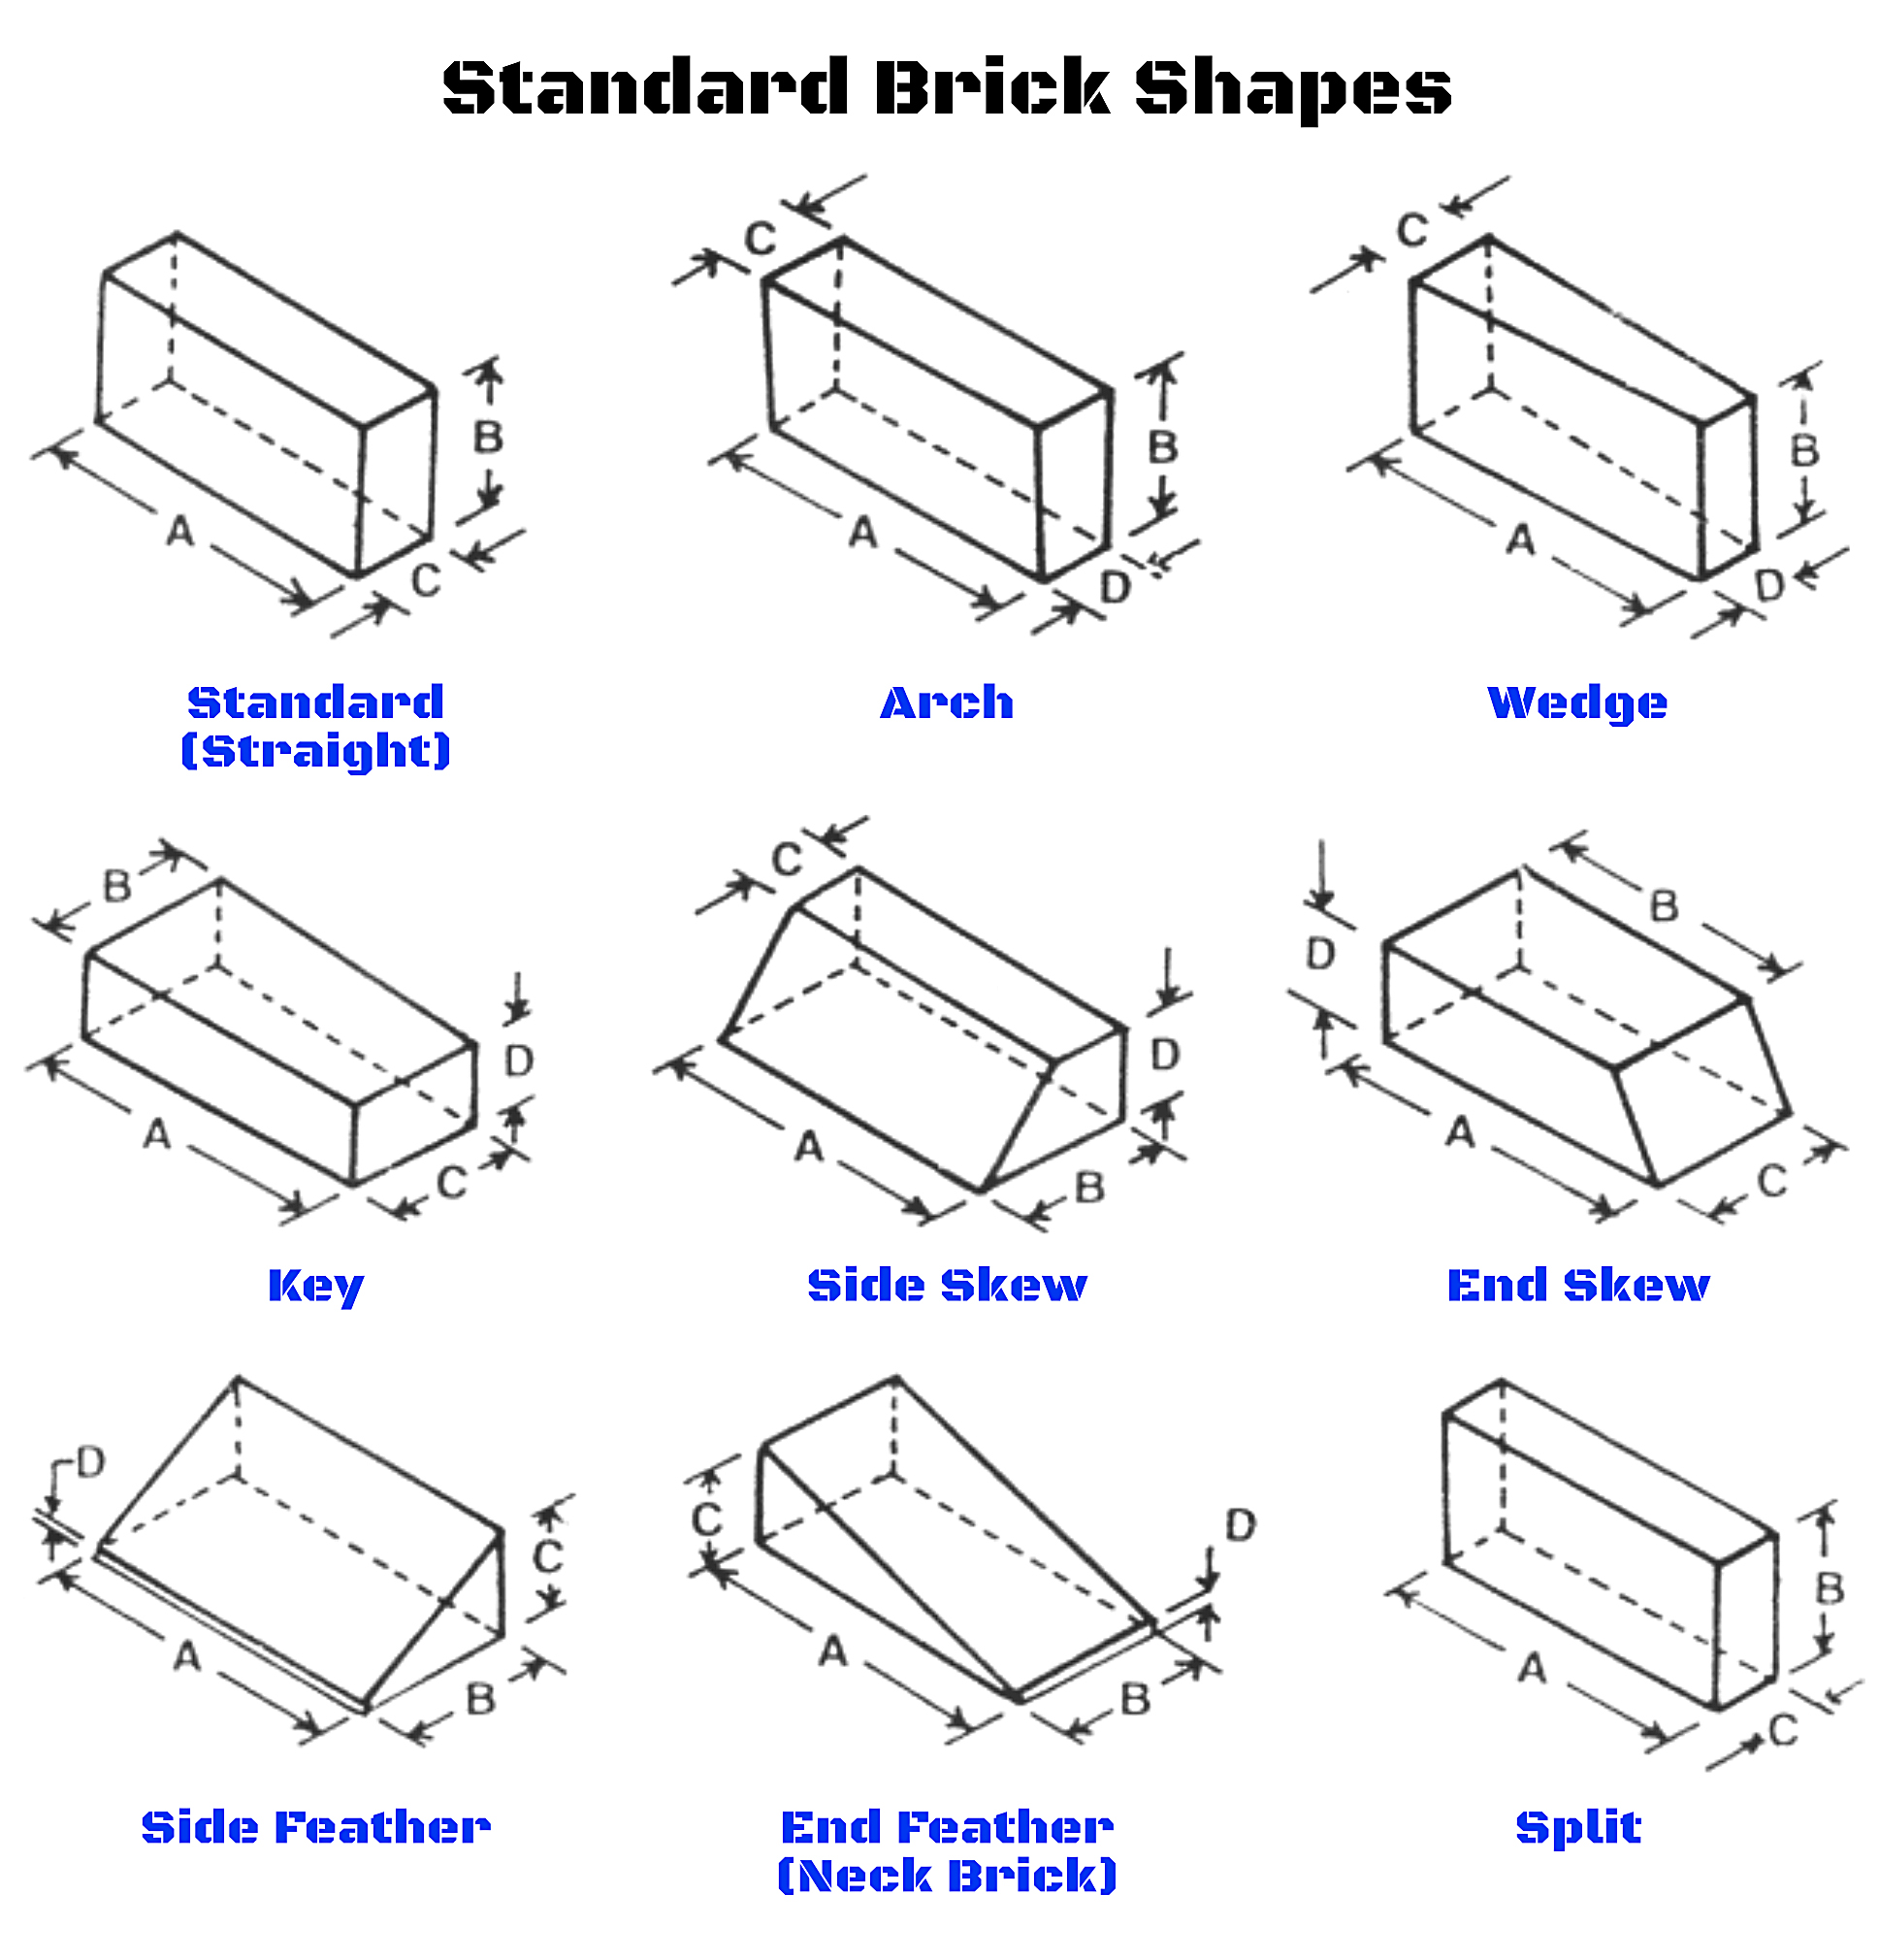 Bricks Selection Guide: Types, Features, Applications